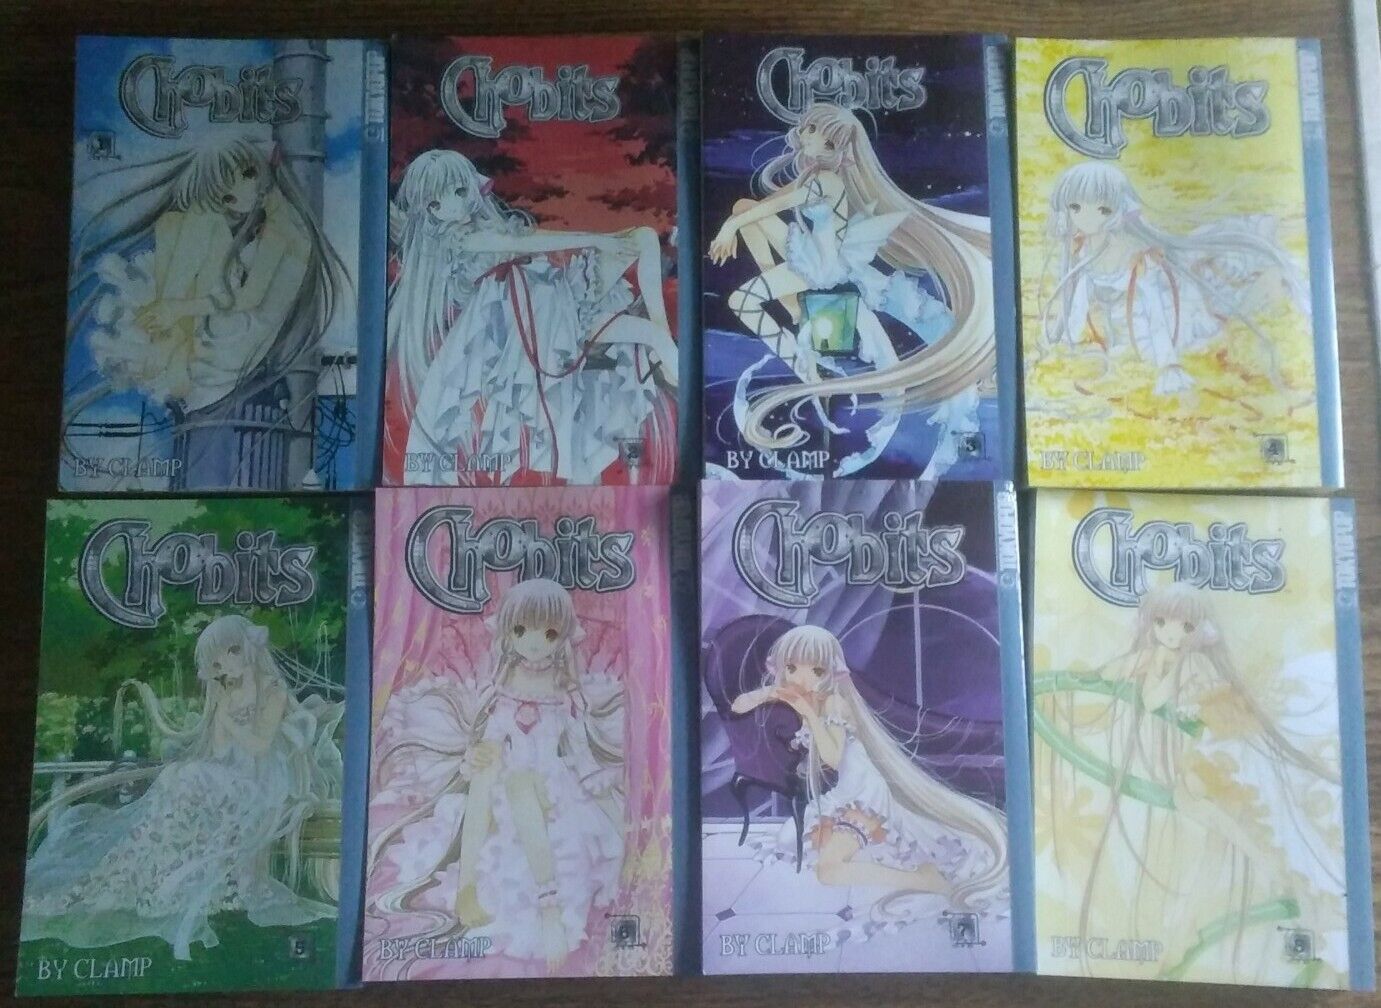 CHOBITS By Clamp TOKYOPOP MANGA Complete Series 1-8 PB English *READ DESCRIPTION